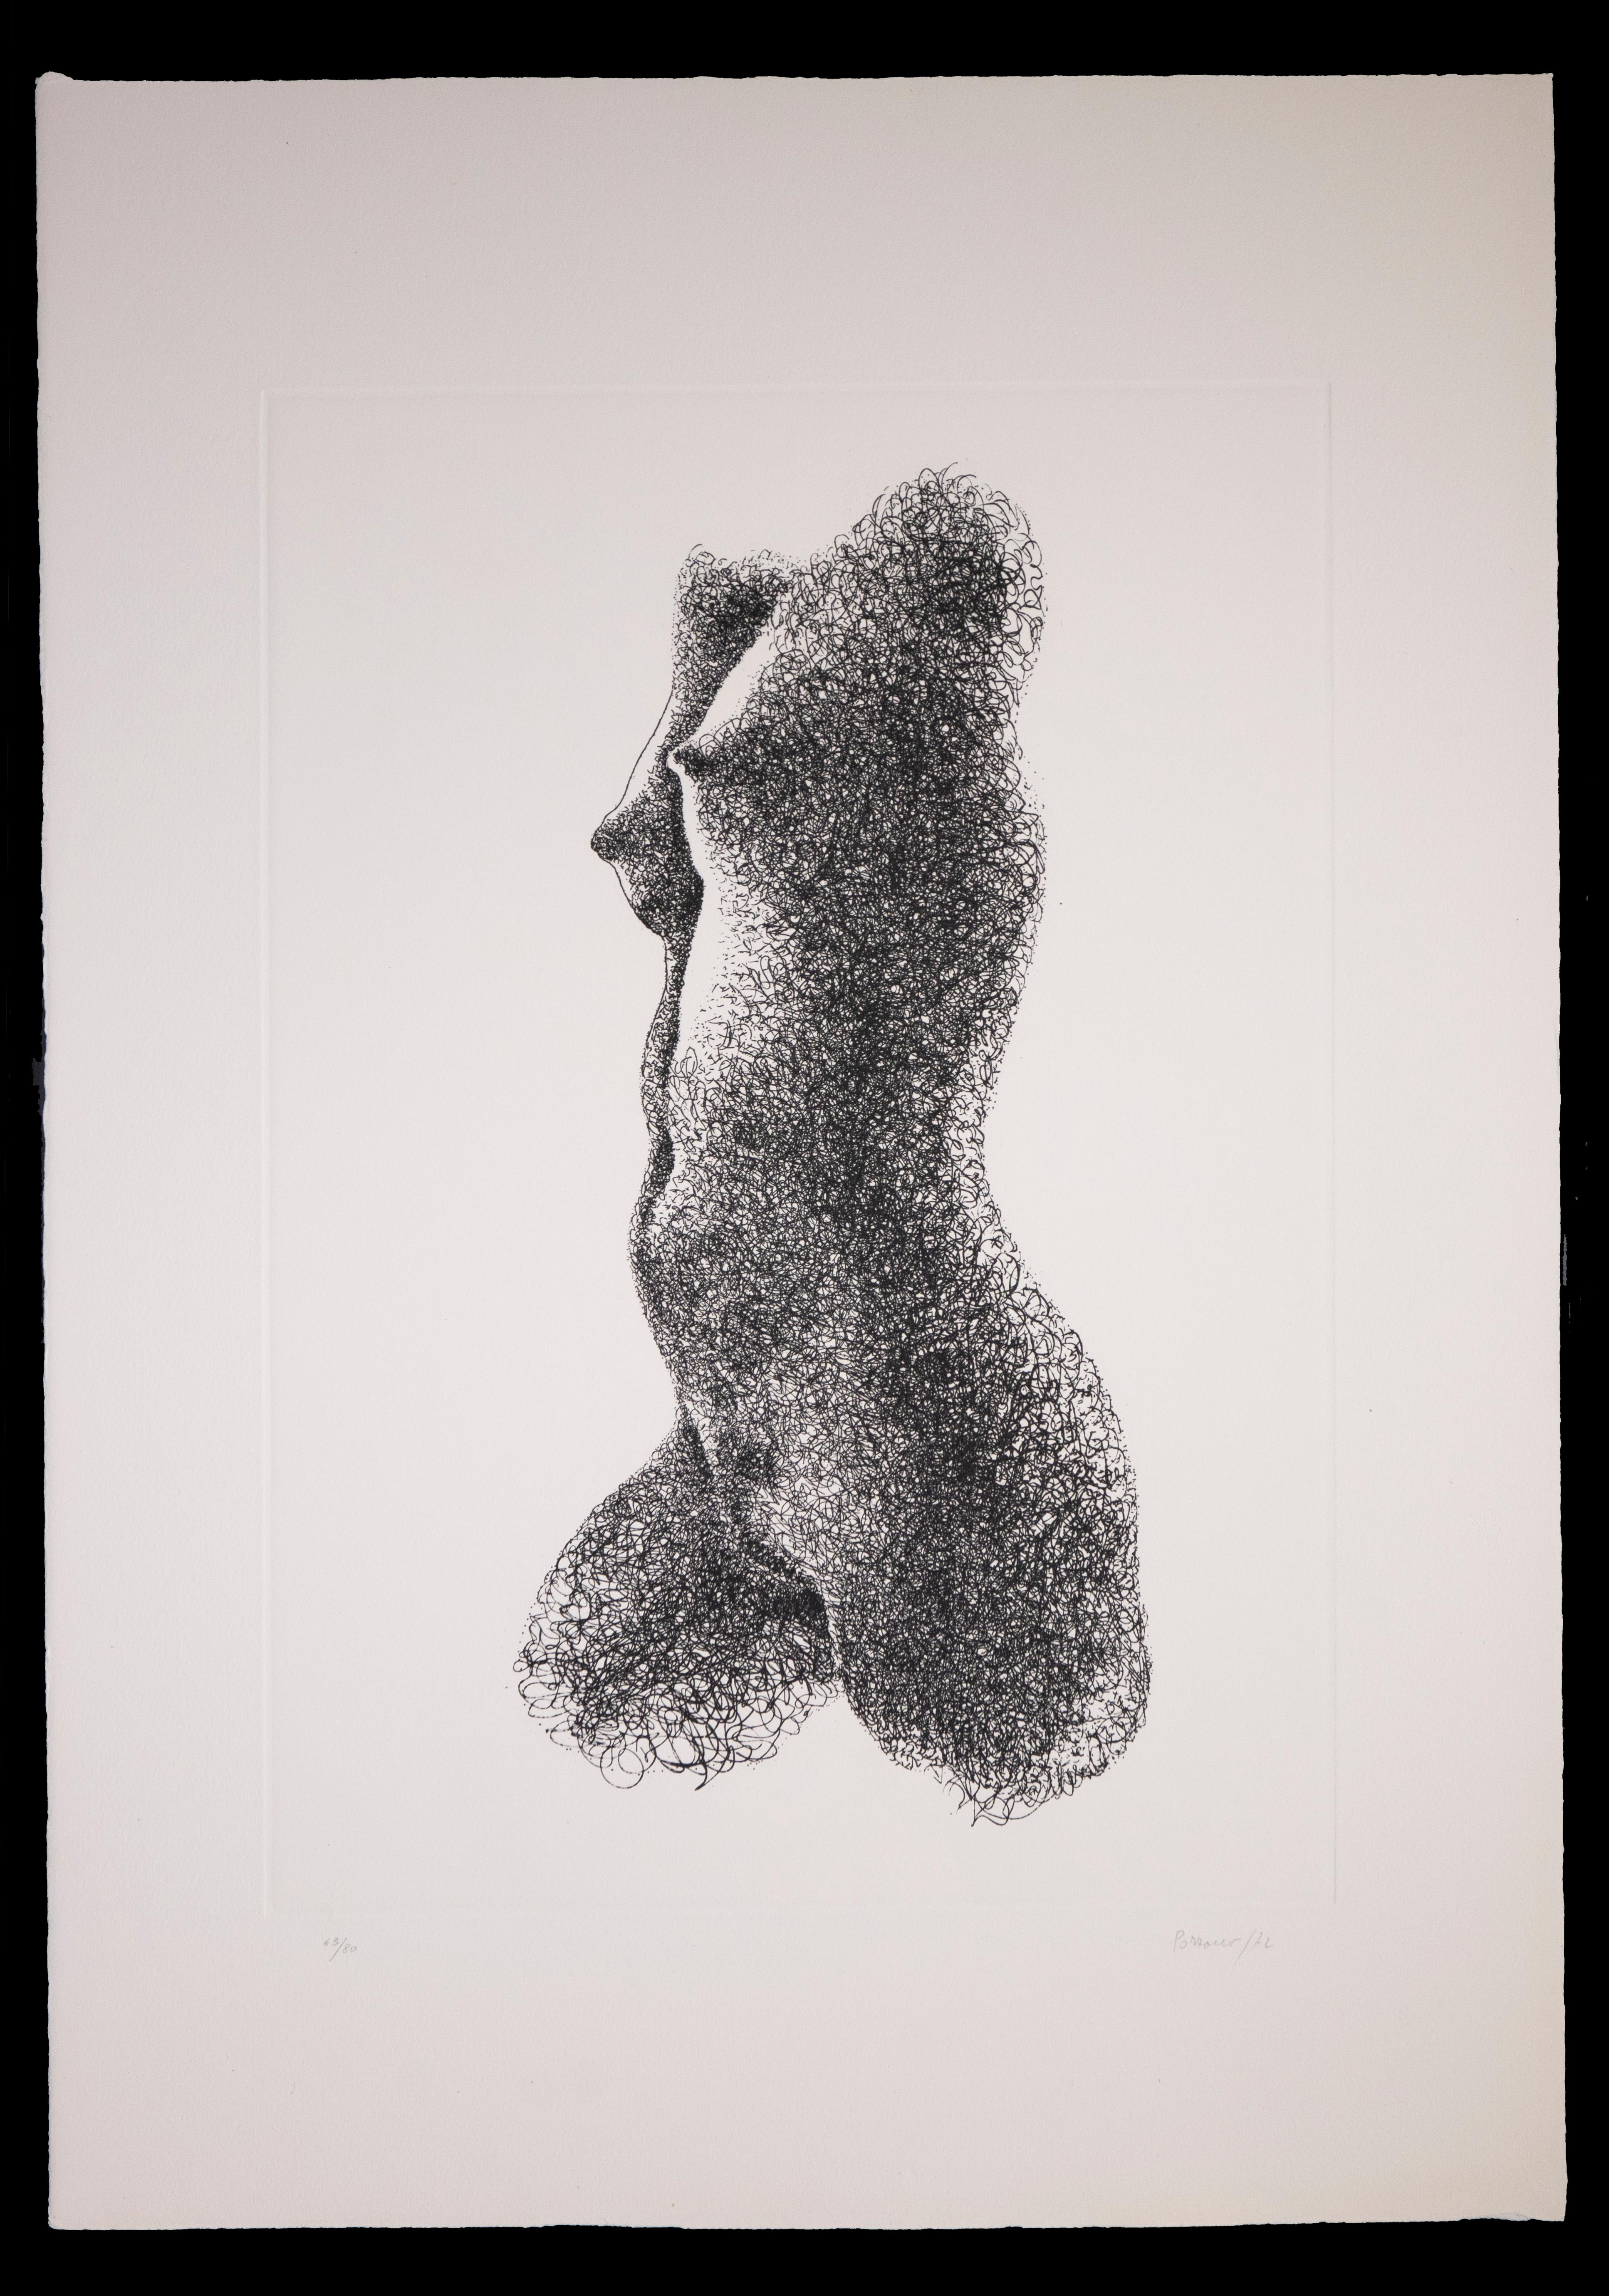 Nude Profile is an original etching realized by Giacomo Porzano in 1972.

Hand Signed and dated on the lower right margin.

Numbered on the lower left margin. Edition of 80 pieces.